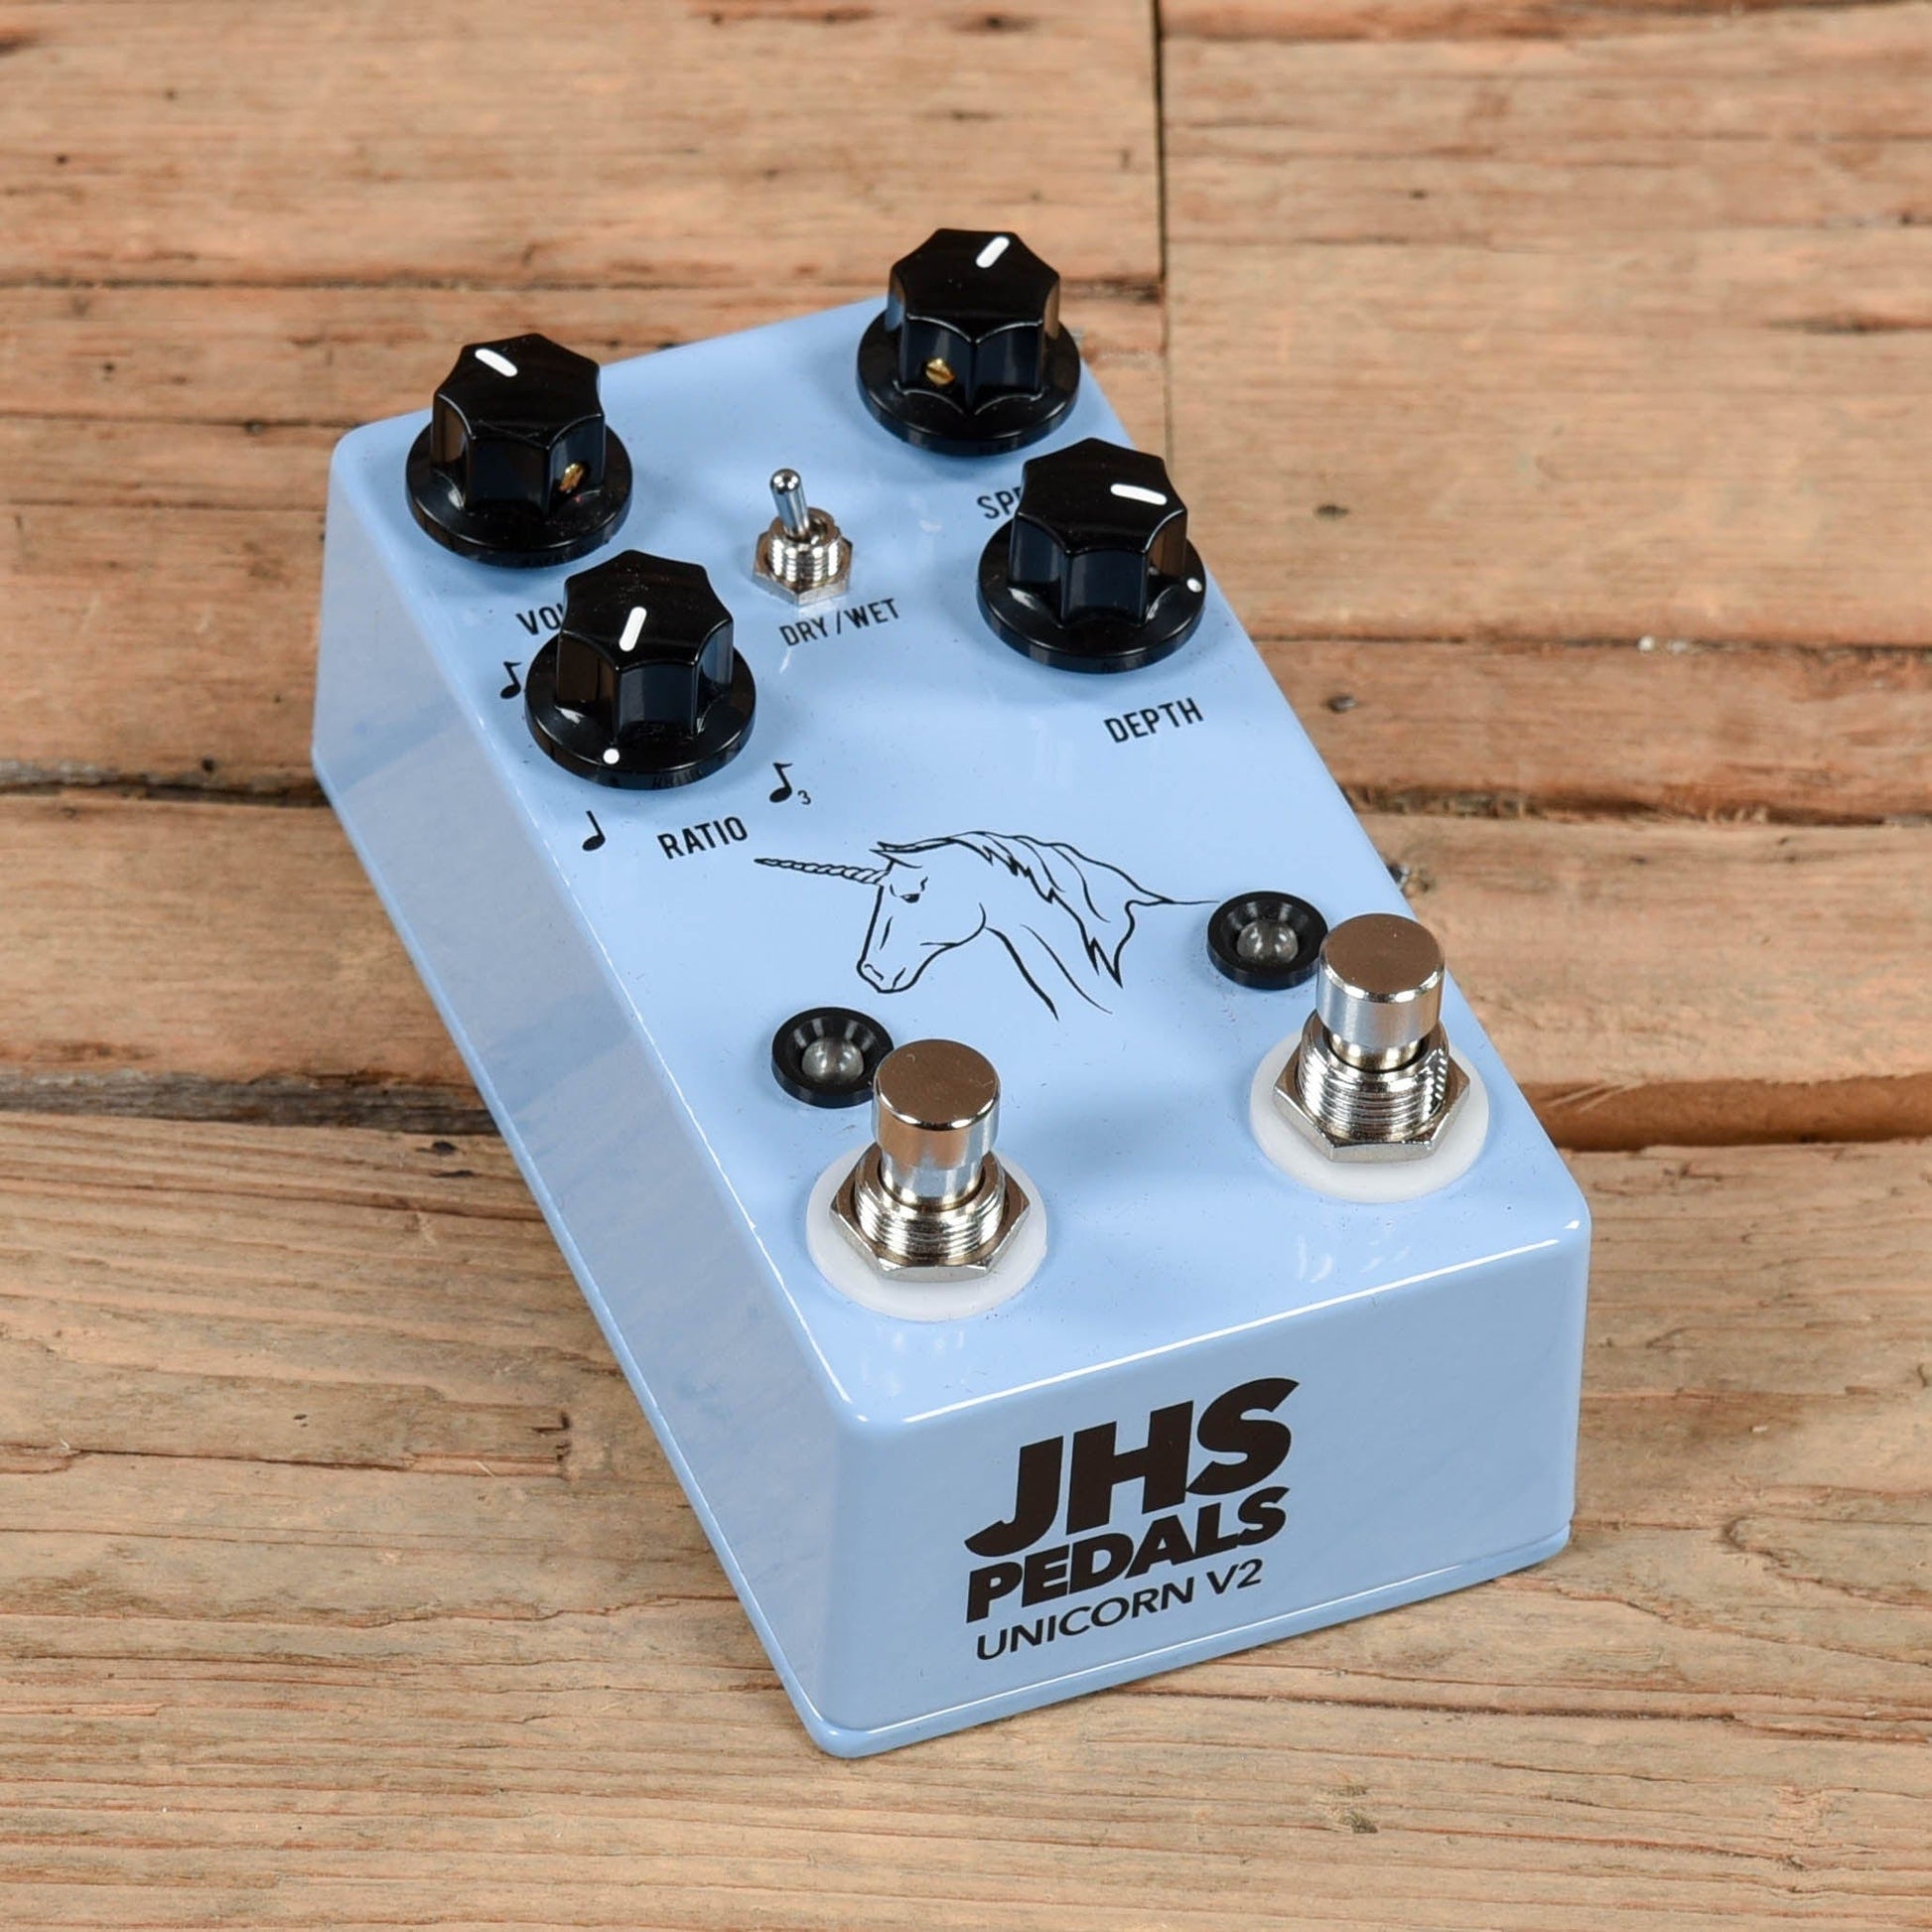 JHS Unicorn V2 Effects and Pedals / Chorus and Vibrato